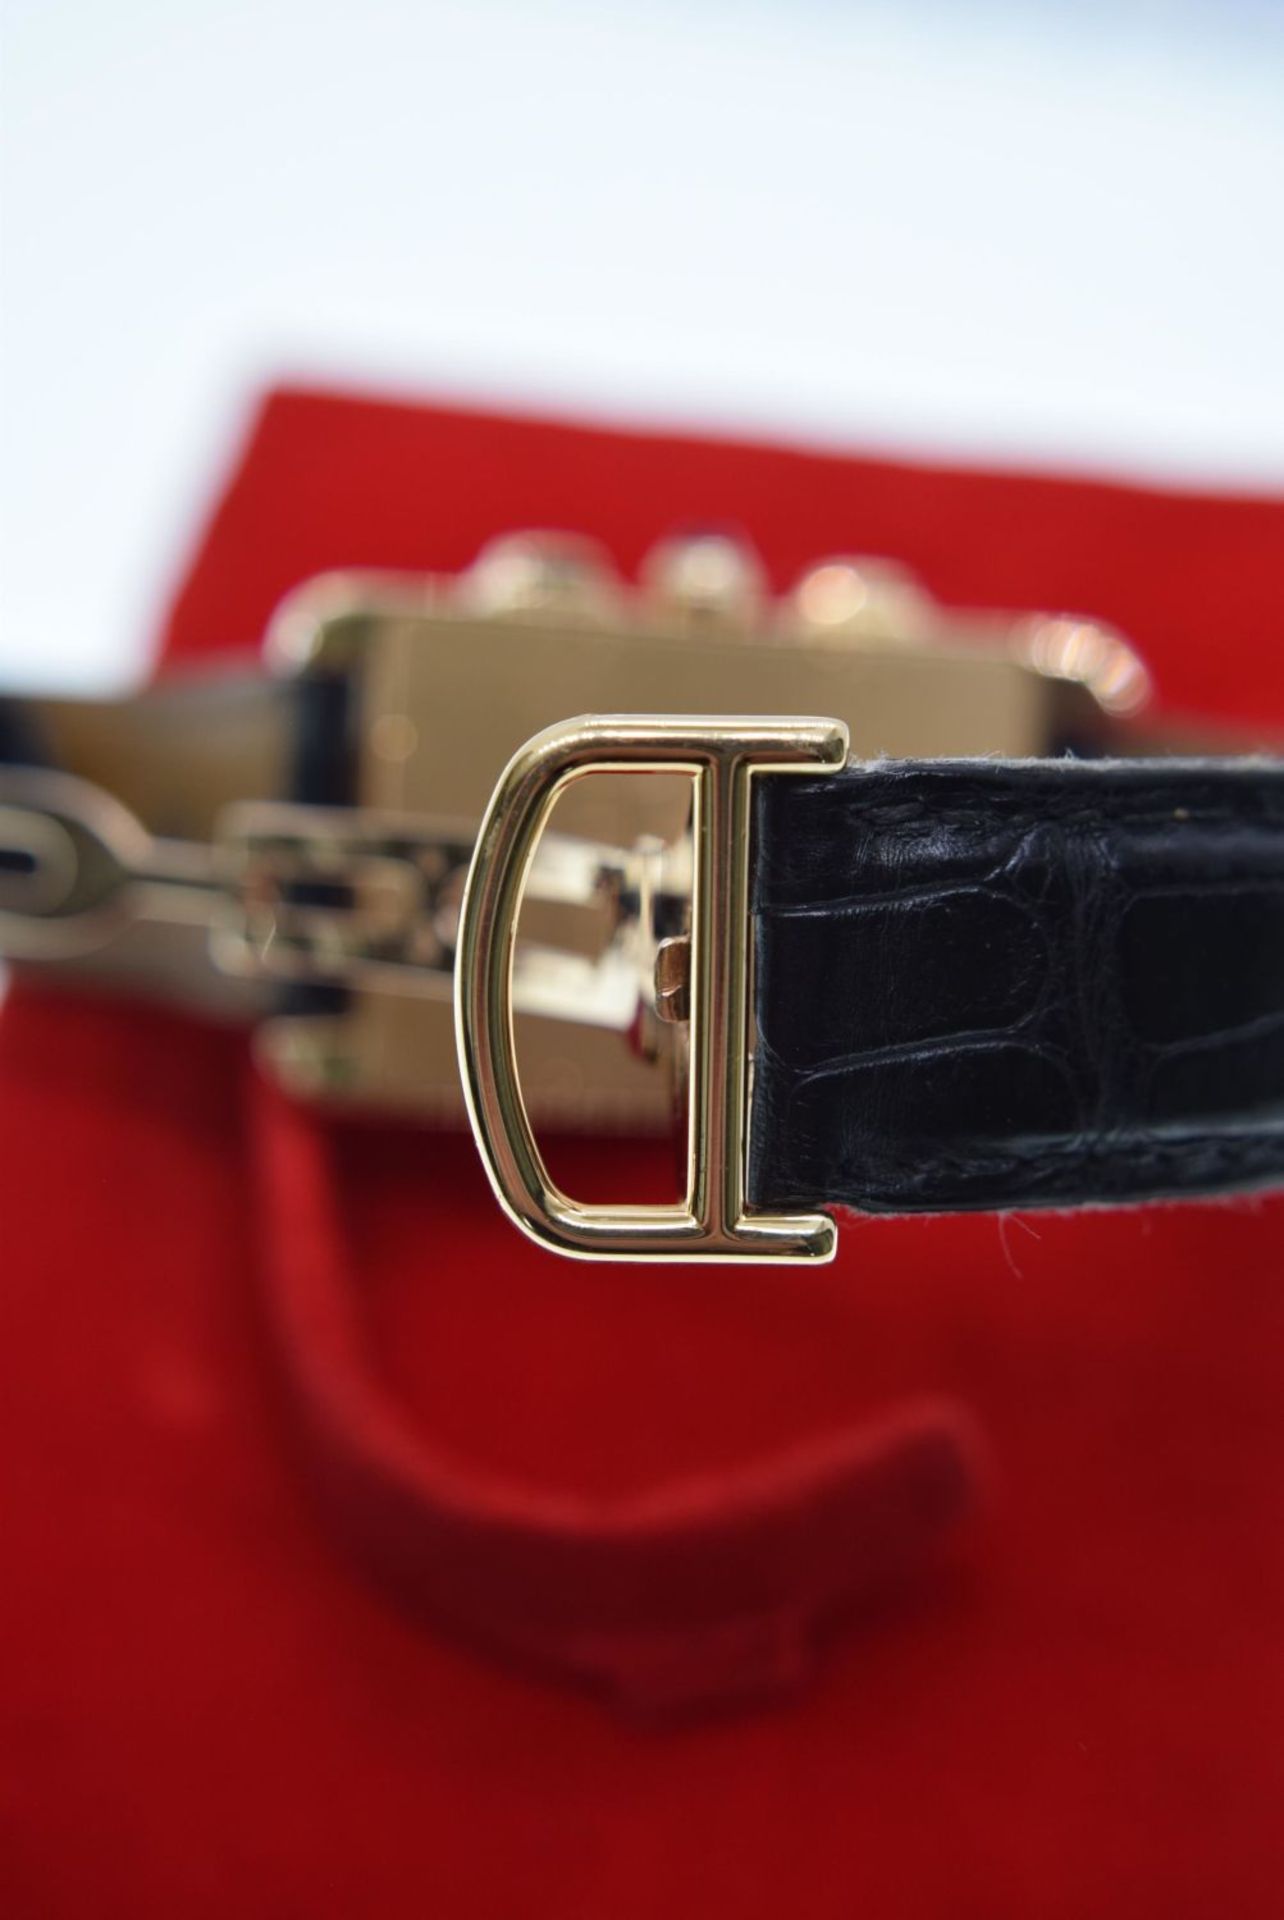 18K GOLD CARTIER TANK AMERICAINE REF. 1730 ON BLACK LEATHER WITH CARTIER SIGNED CLASP - Image 5 of 8